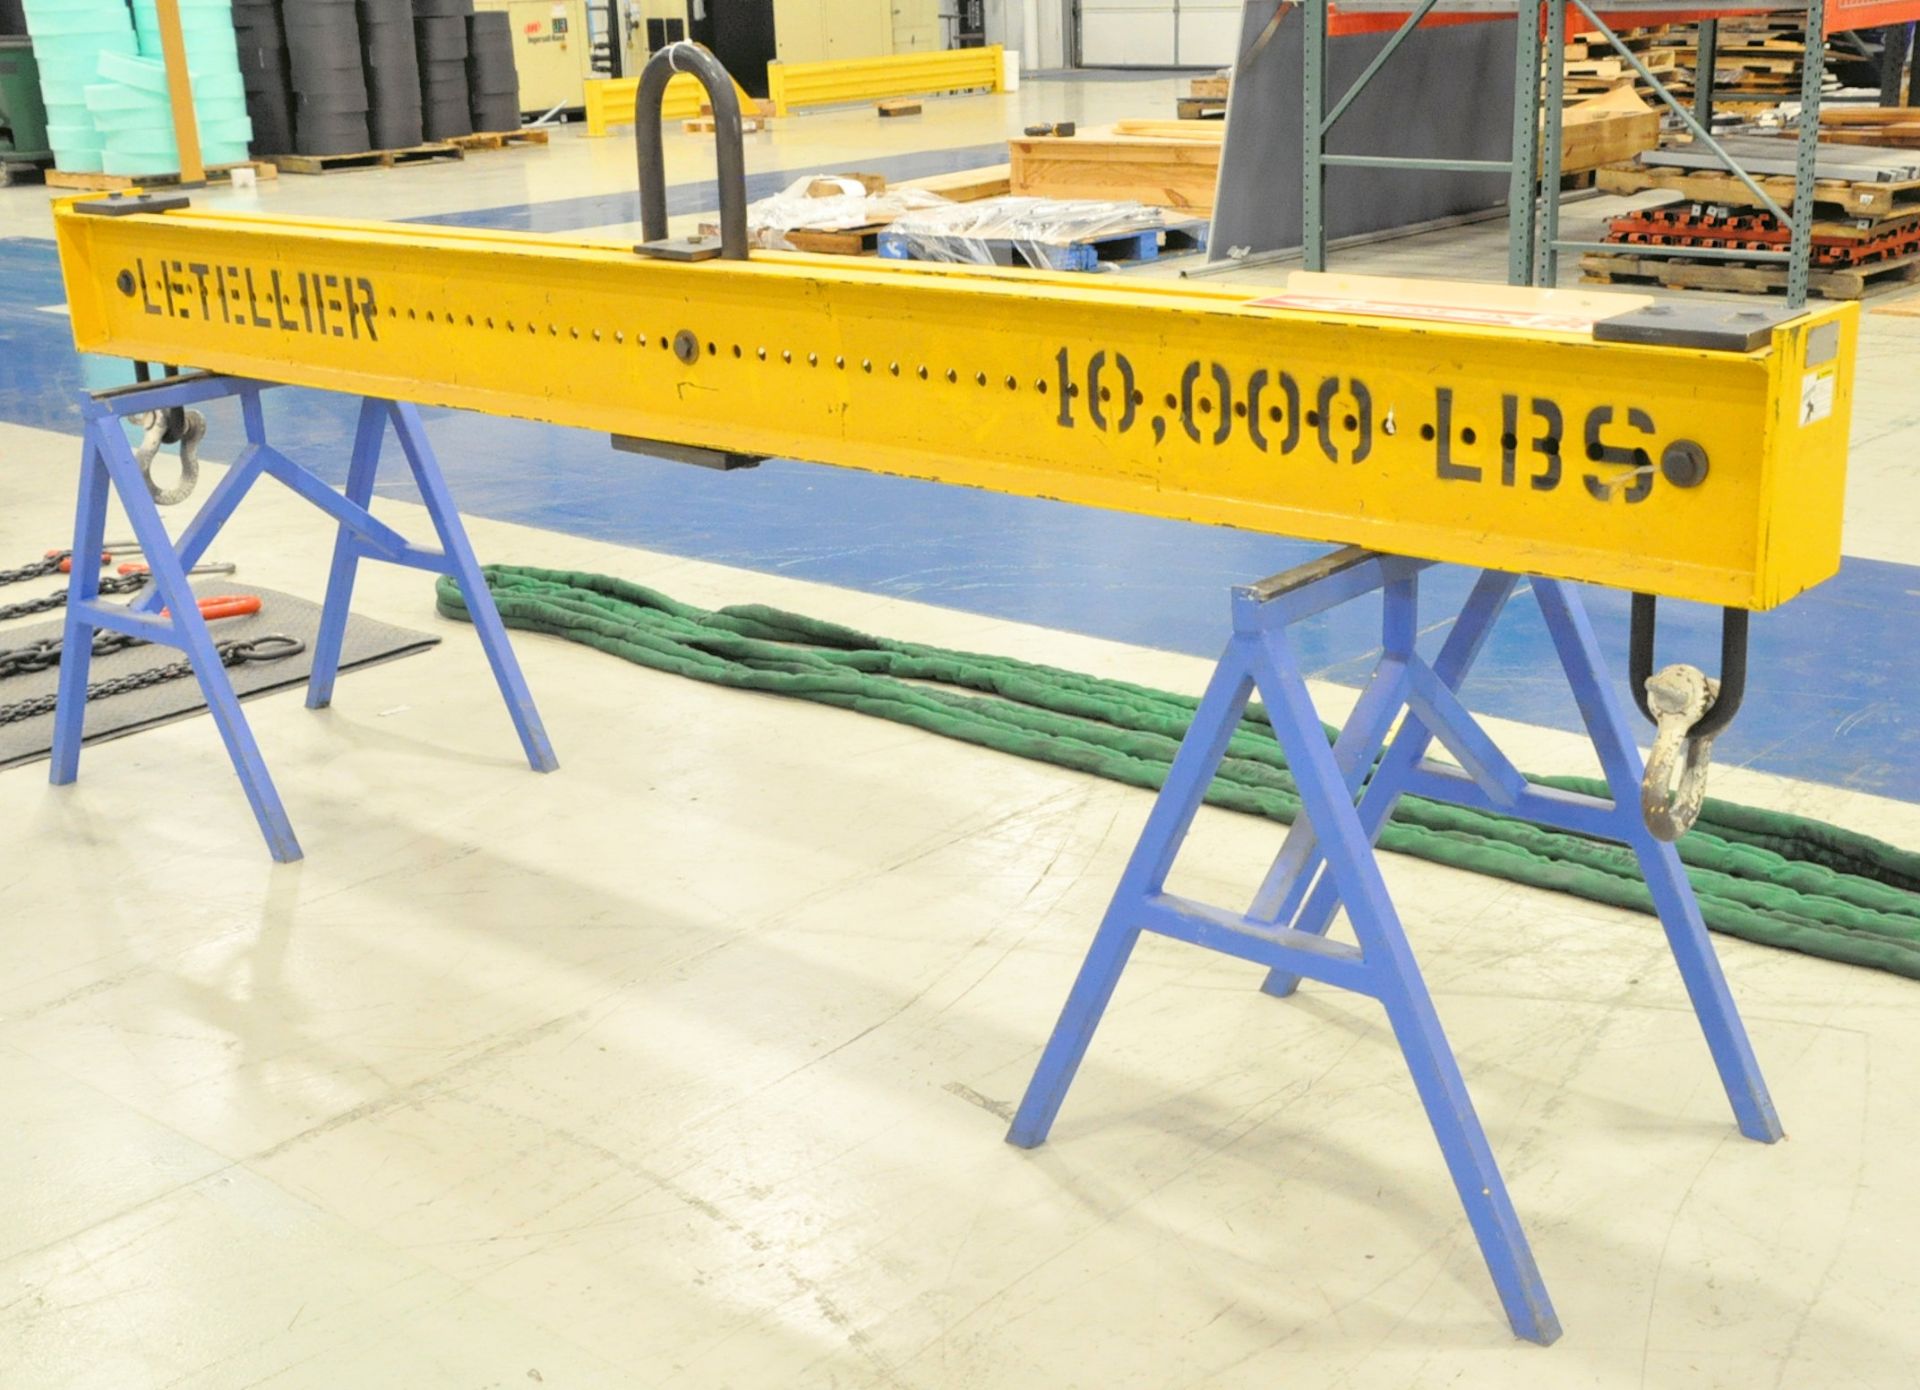 Letellier 10,000-Lbs. x 10' Overhead Crane Spreader Bar, S/n N/a, with Steel Work Horse Stands - Image 2 of 5